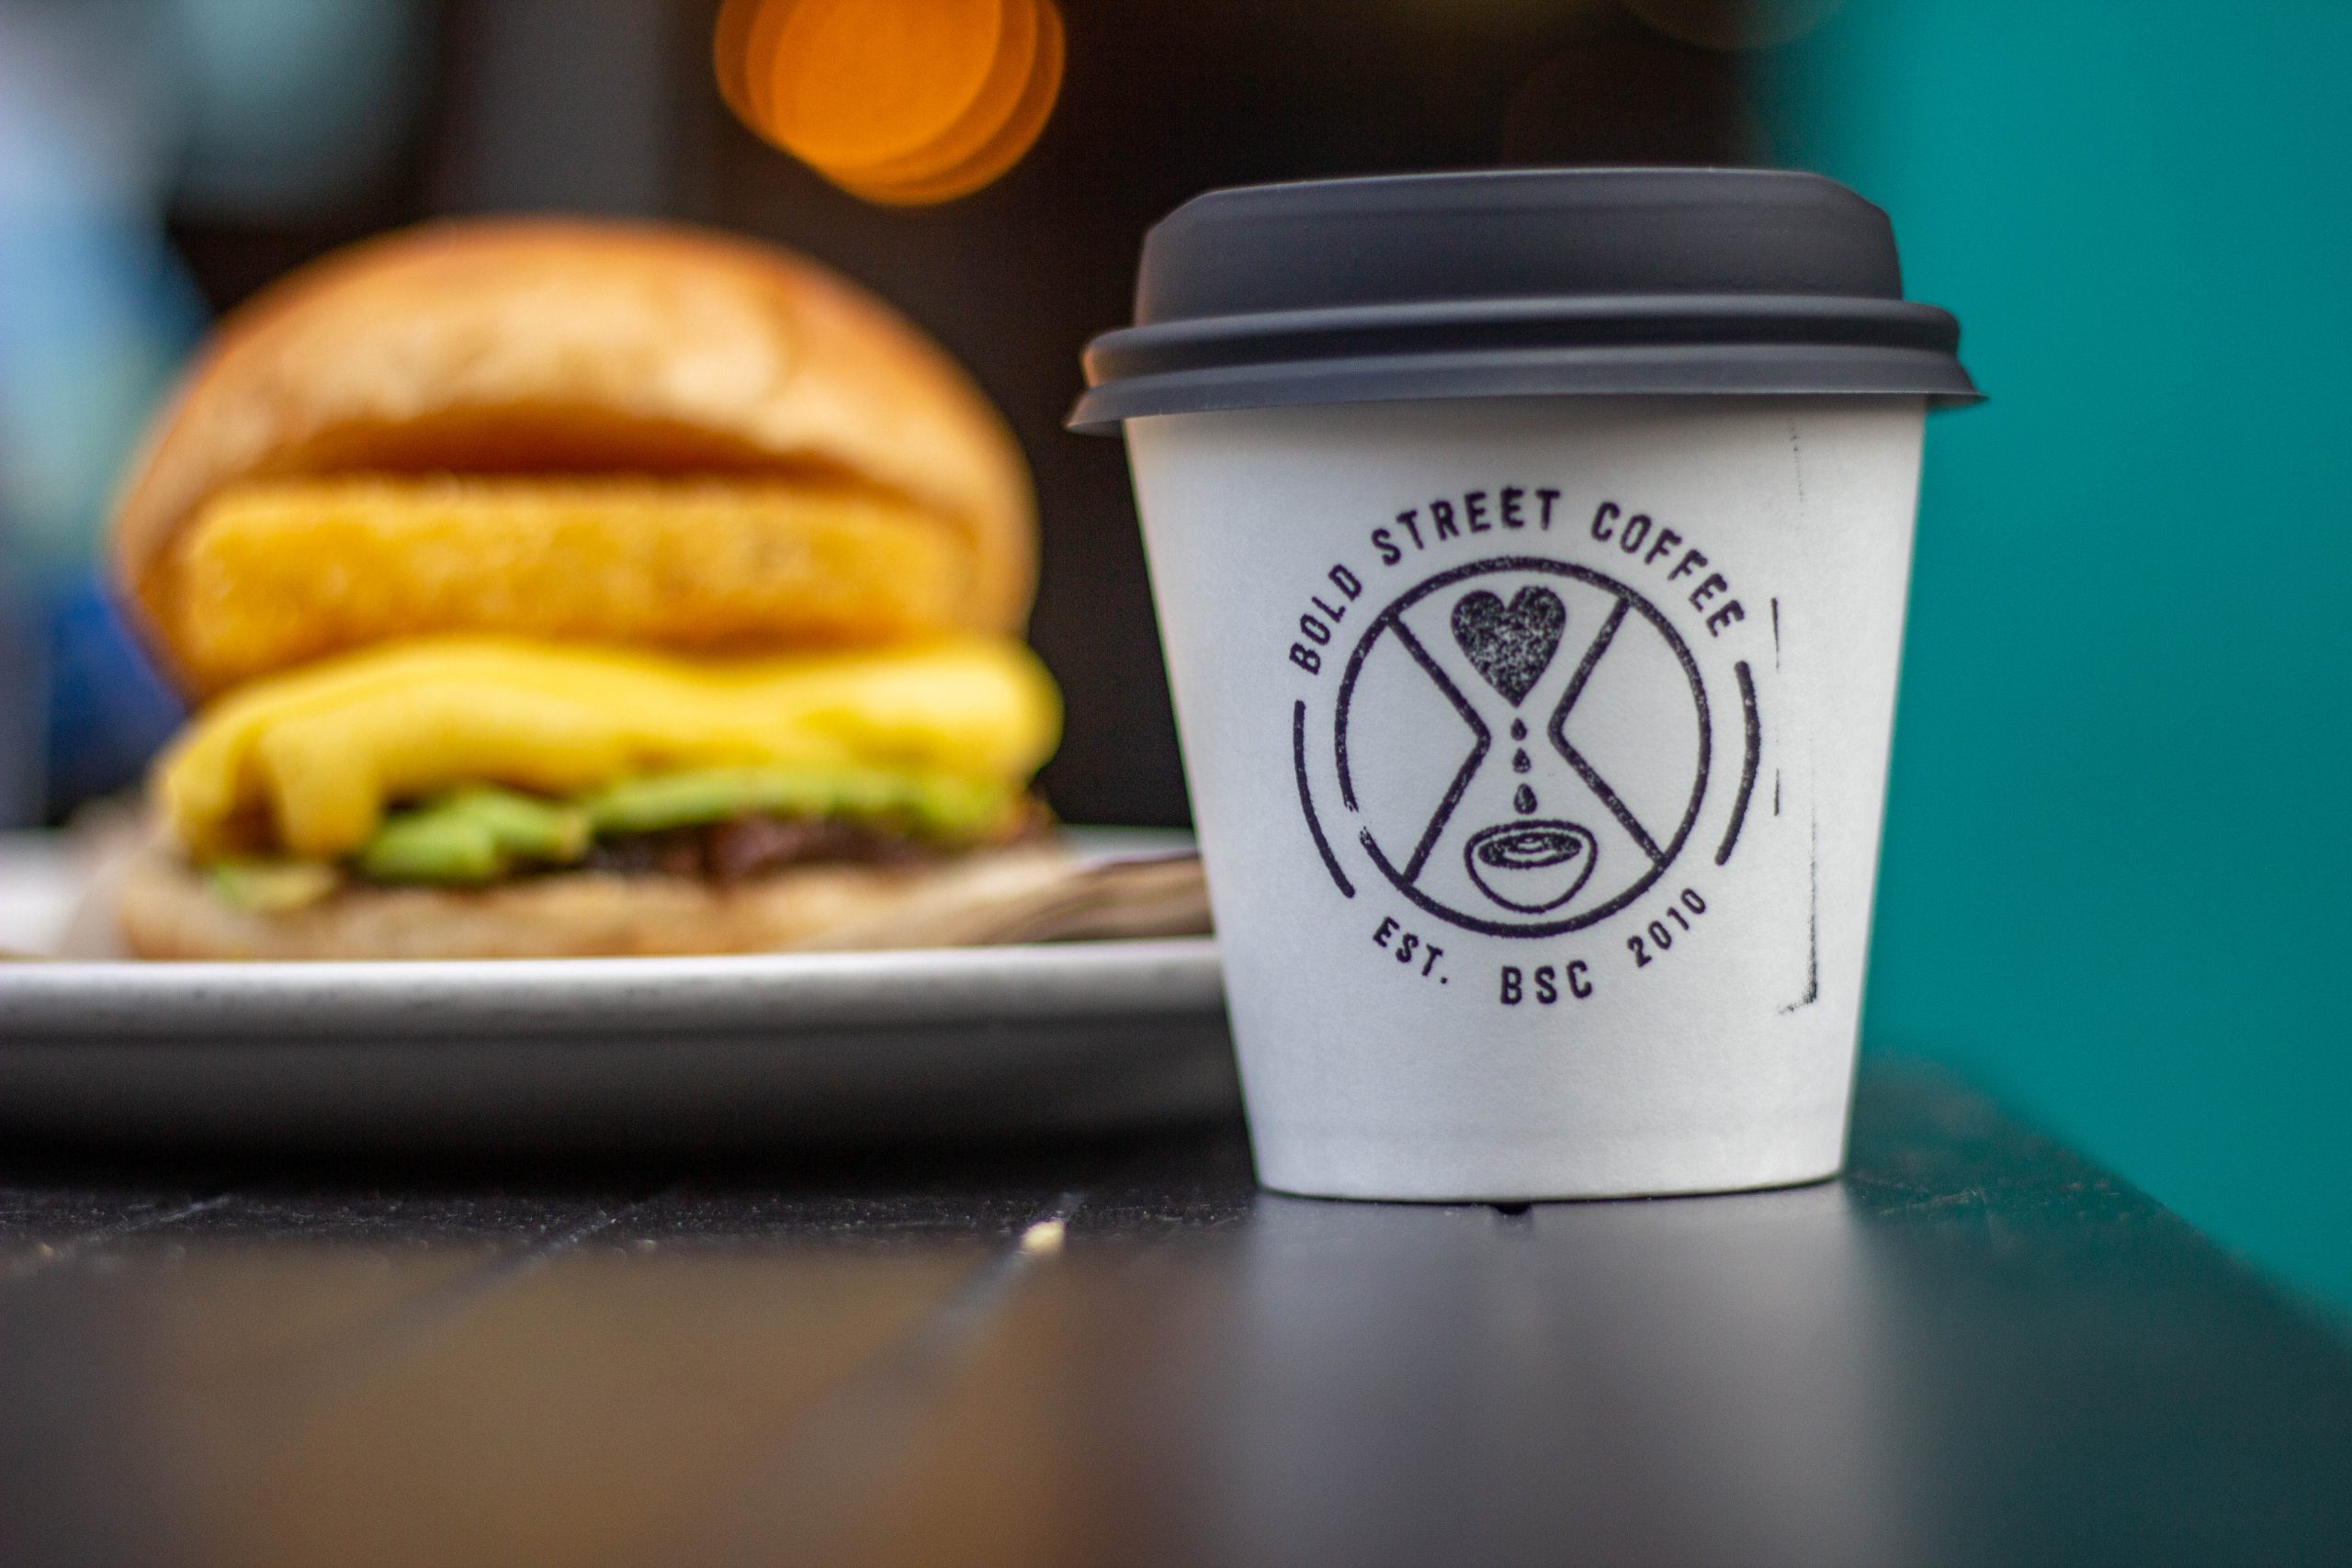 Bold Street Coffee to open at University Green